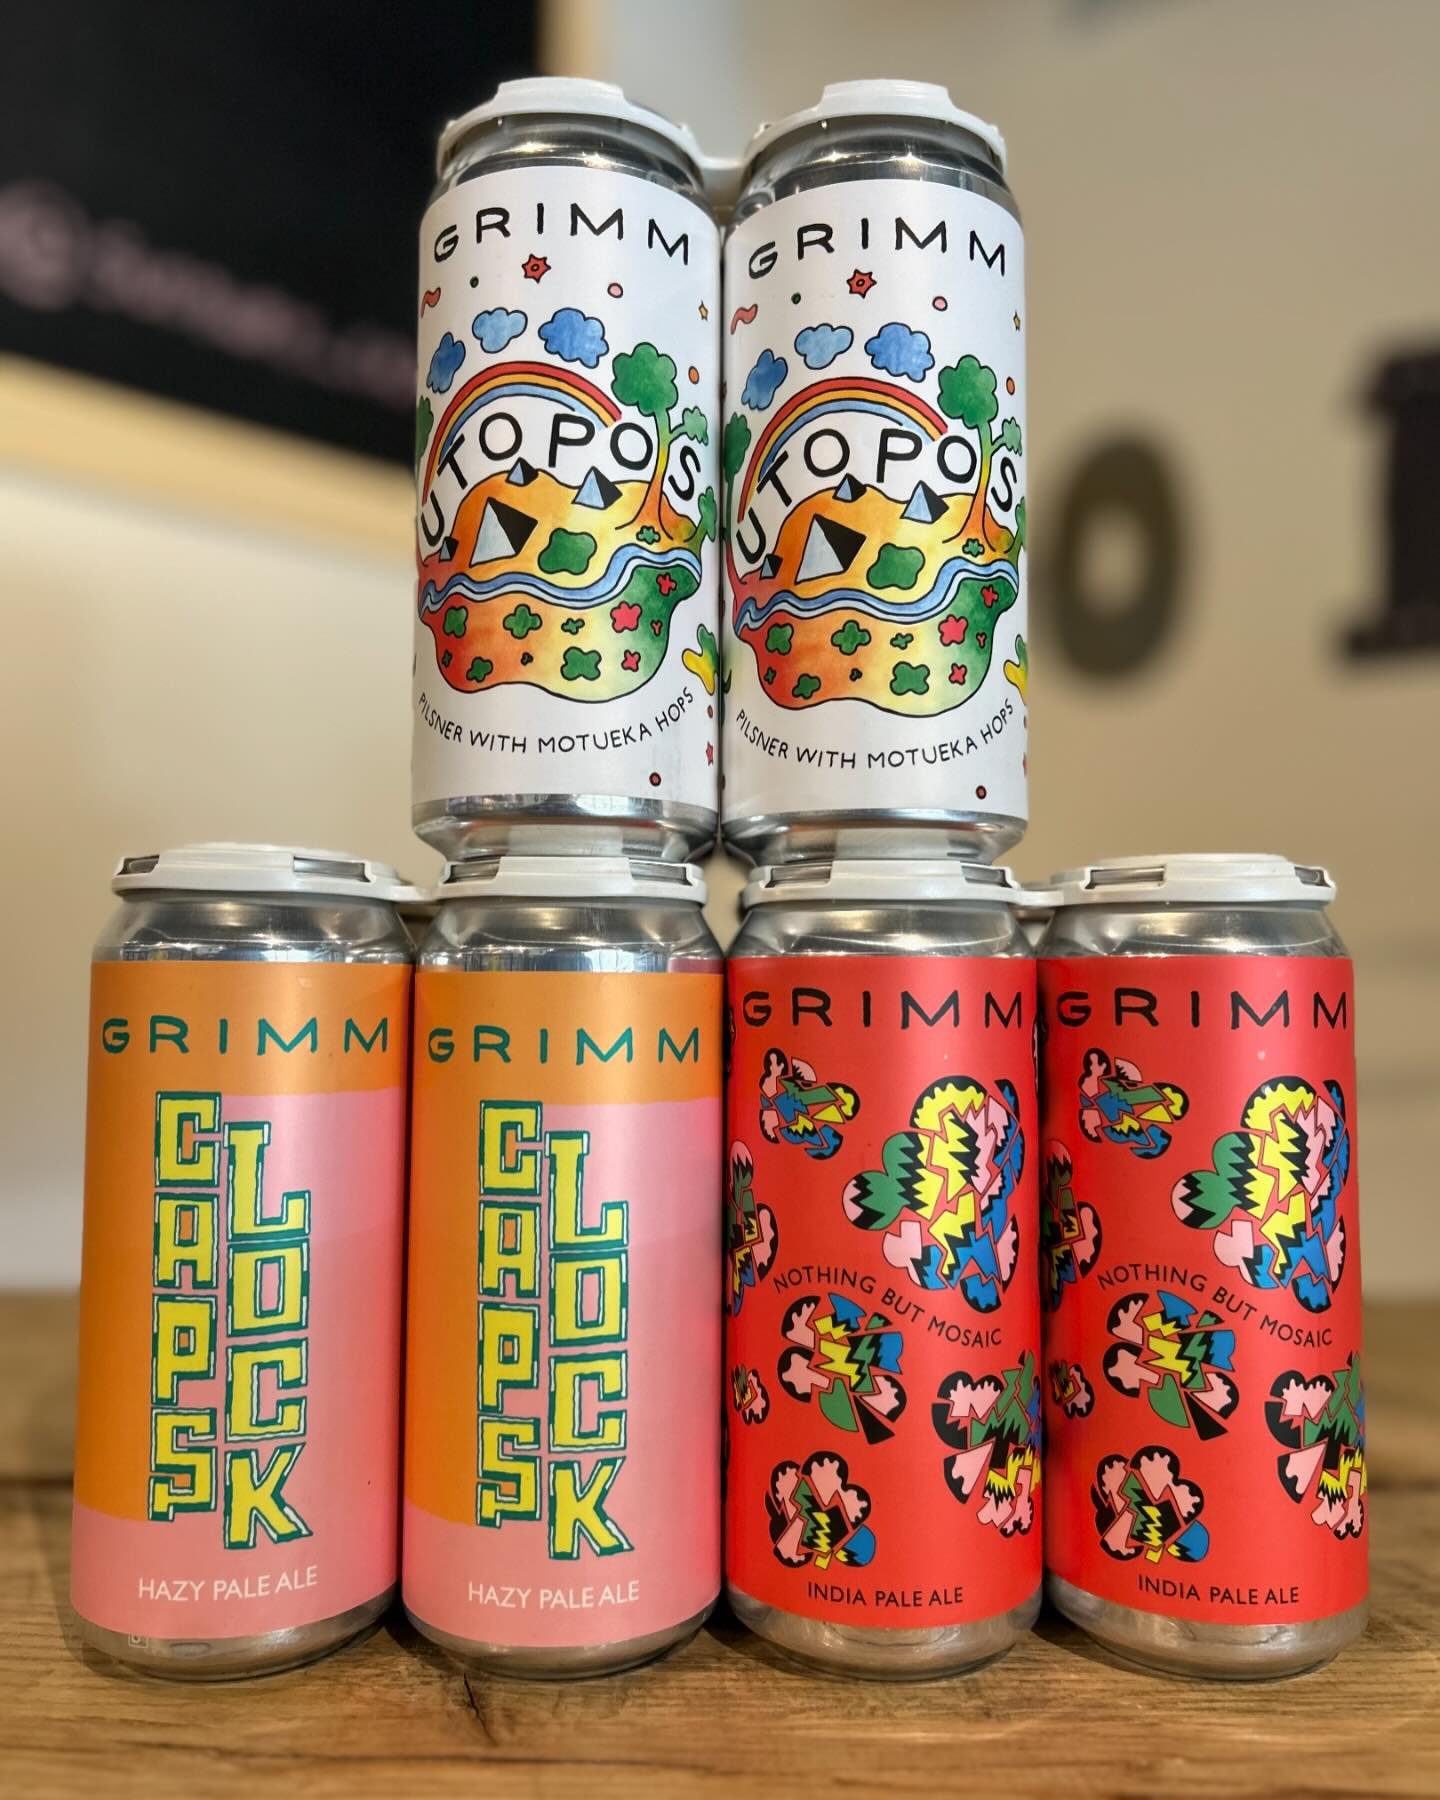 Fresh @grimmales #NowAvailable #SudburyCraftBeer #SudburyMA
&mdash;
UTOPOS, a double-decoction mashed pilsner, is dry hopped with zippy Motueka hops. The nose is bright with freshly zested lime and soft undertones of honeysuckle. Utopos drinks crisp 